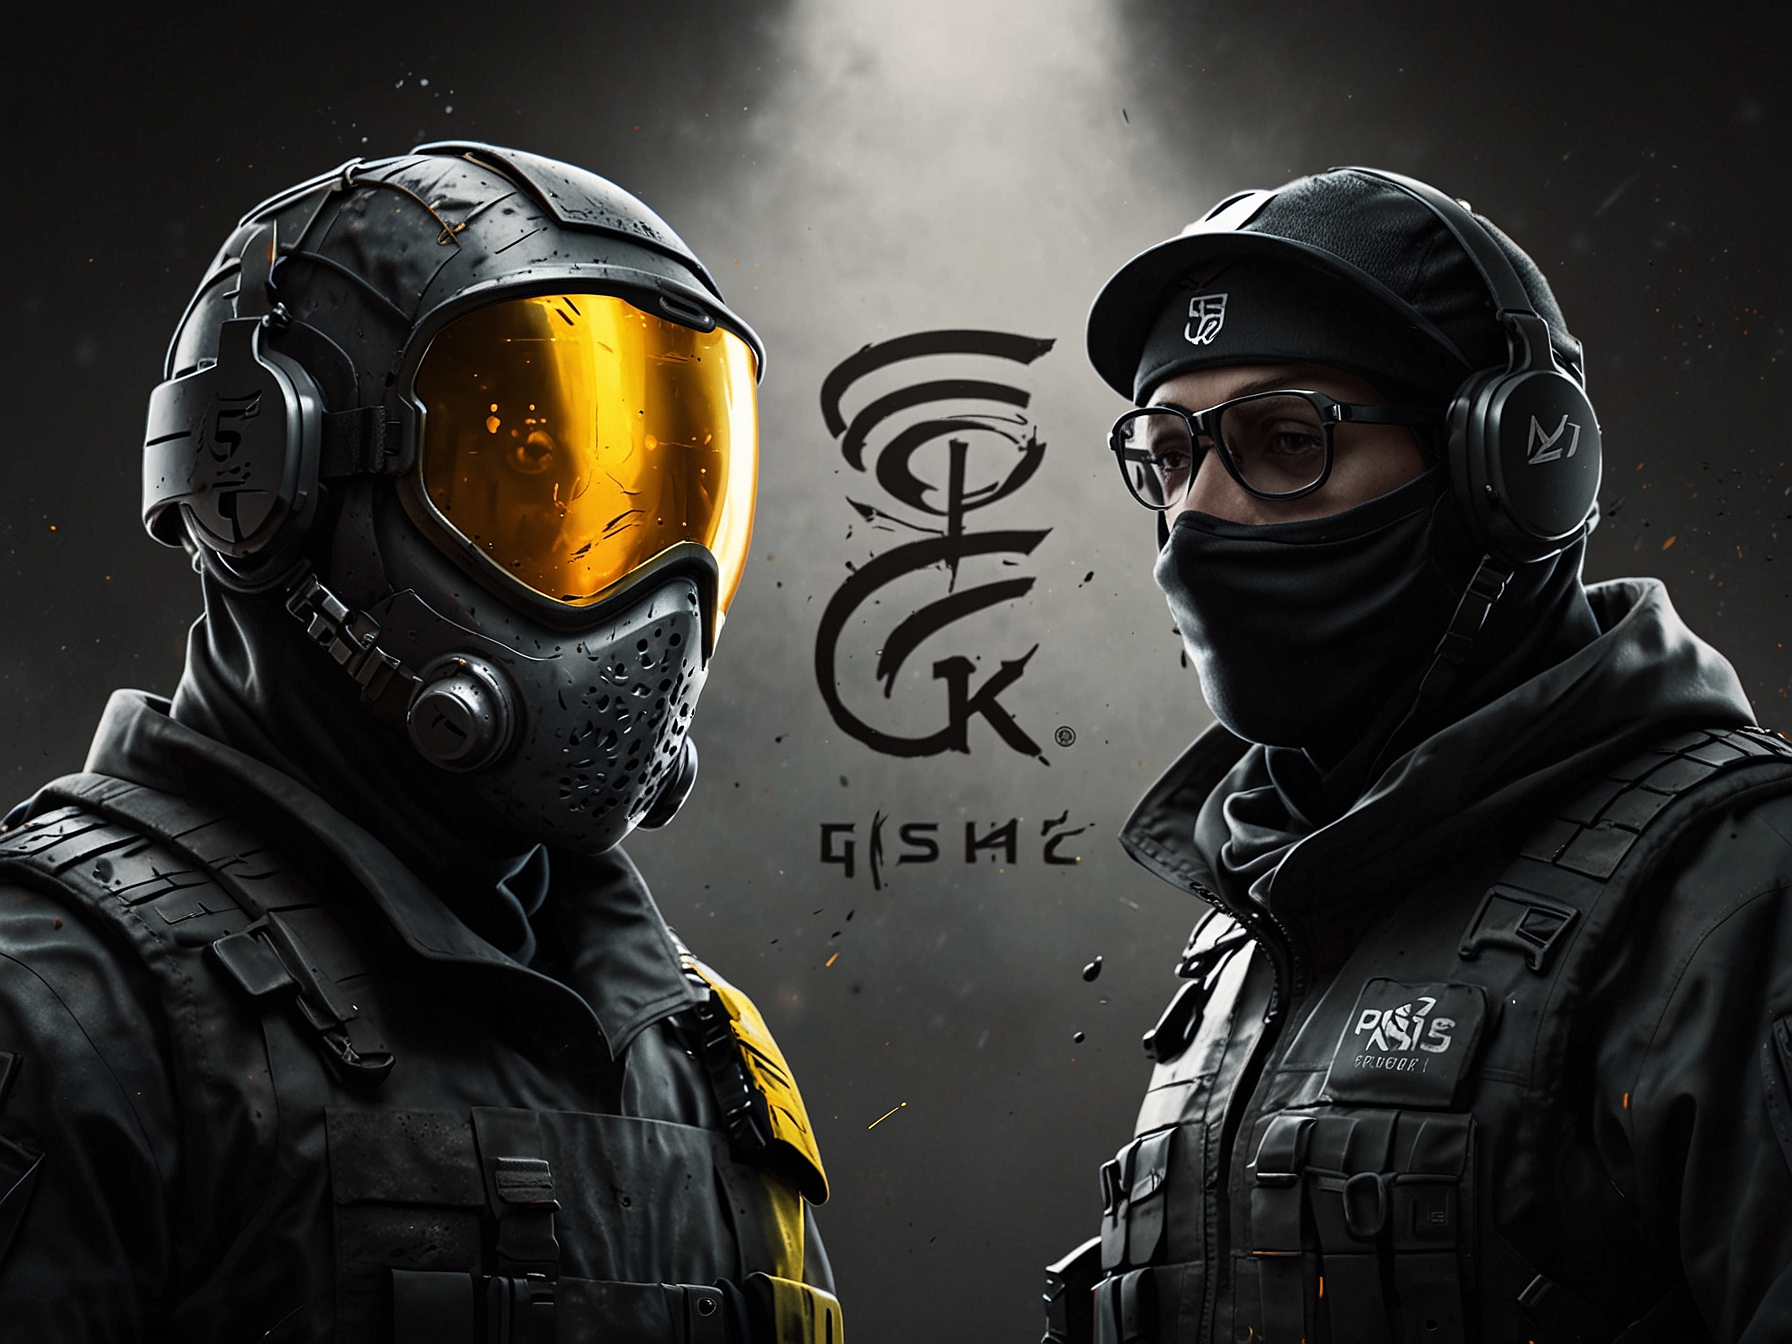 A vibrant image showcasing the new GSK faction characters from the Rainbow Six: Siege universe, highlighting their unique abilities and skills in the world of XDefiant.